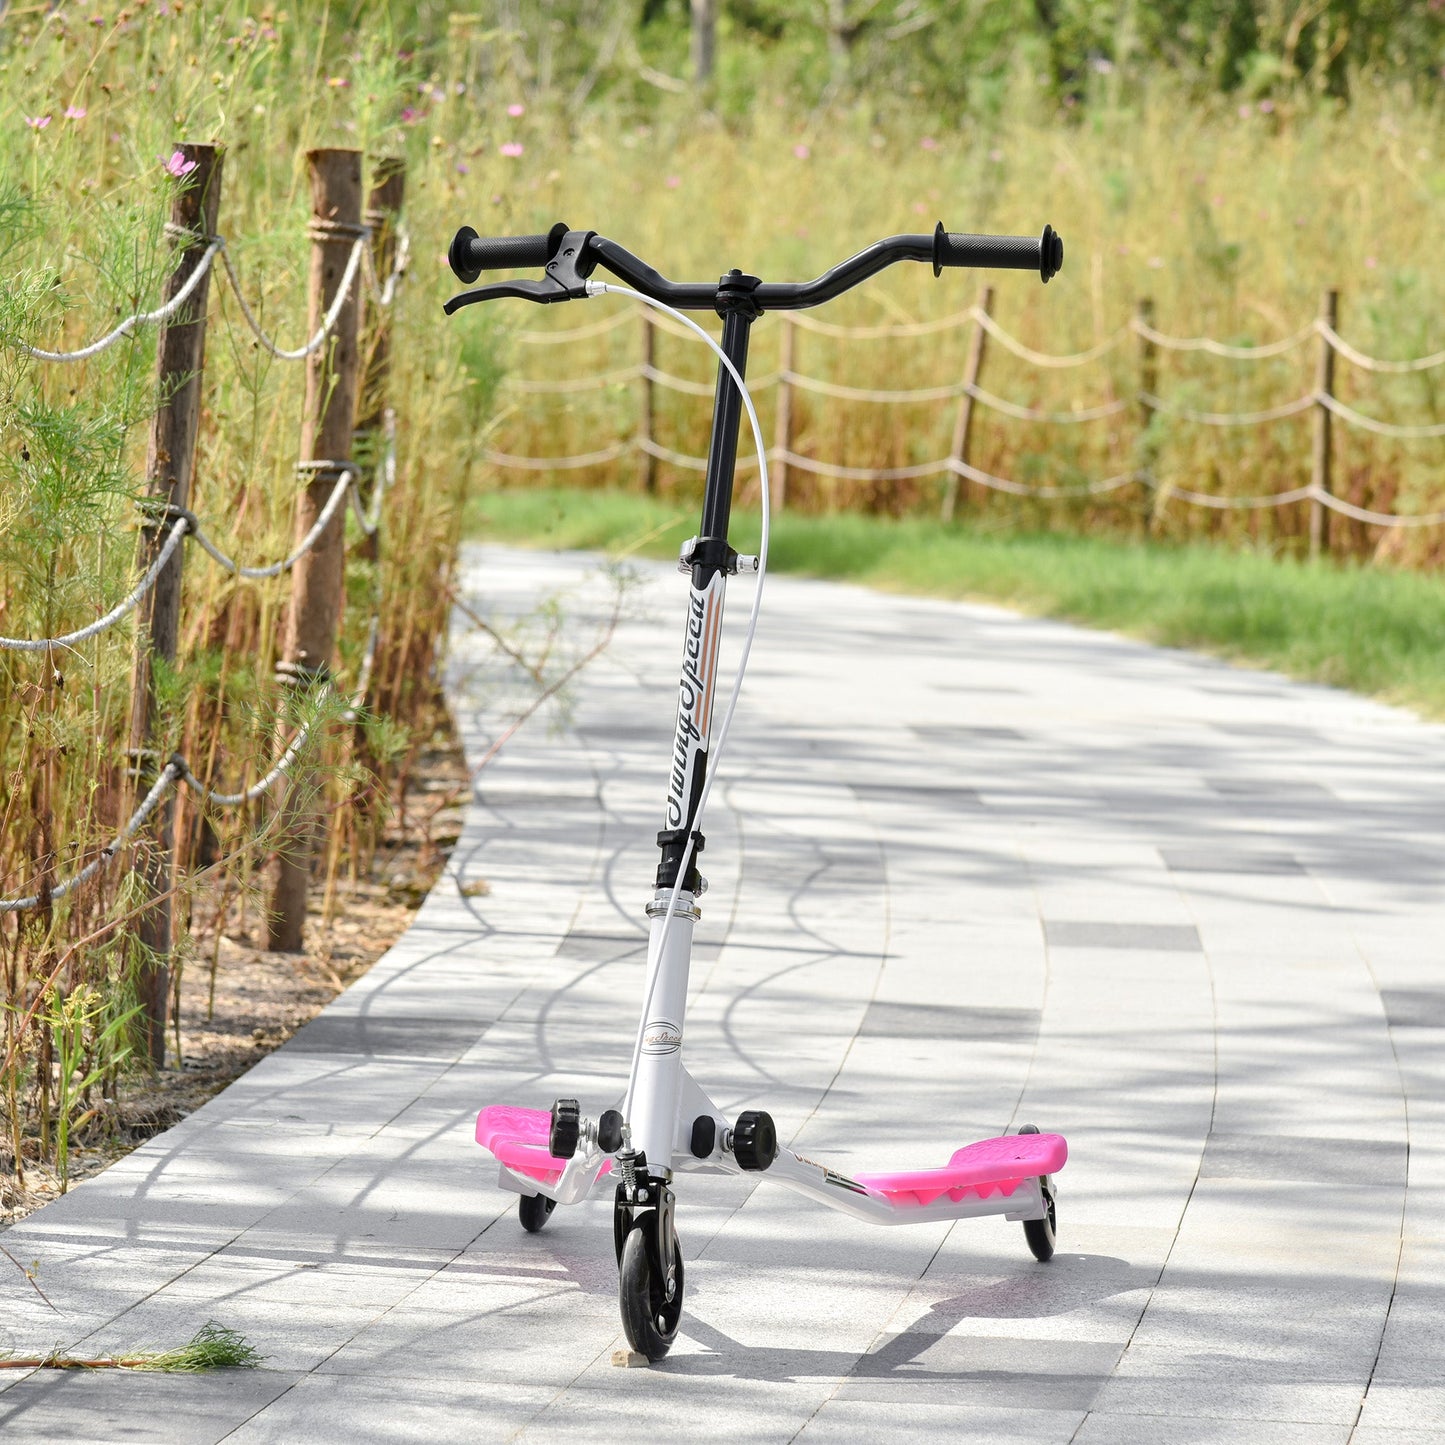 Y Fliker Scooter, Outdoor Swing Wiggle Scooter, 3 Wheel Scooter for 6-8 Years Old, Pink at Gallery Canada